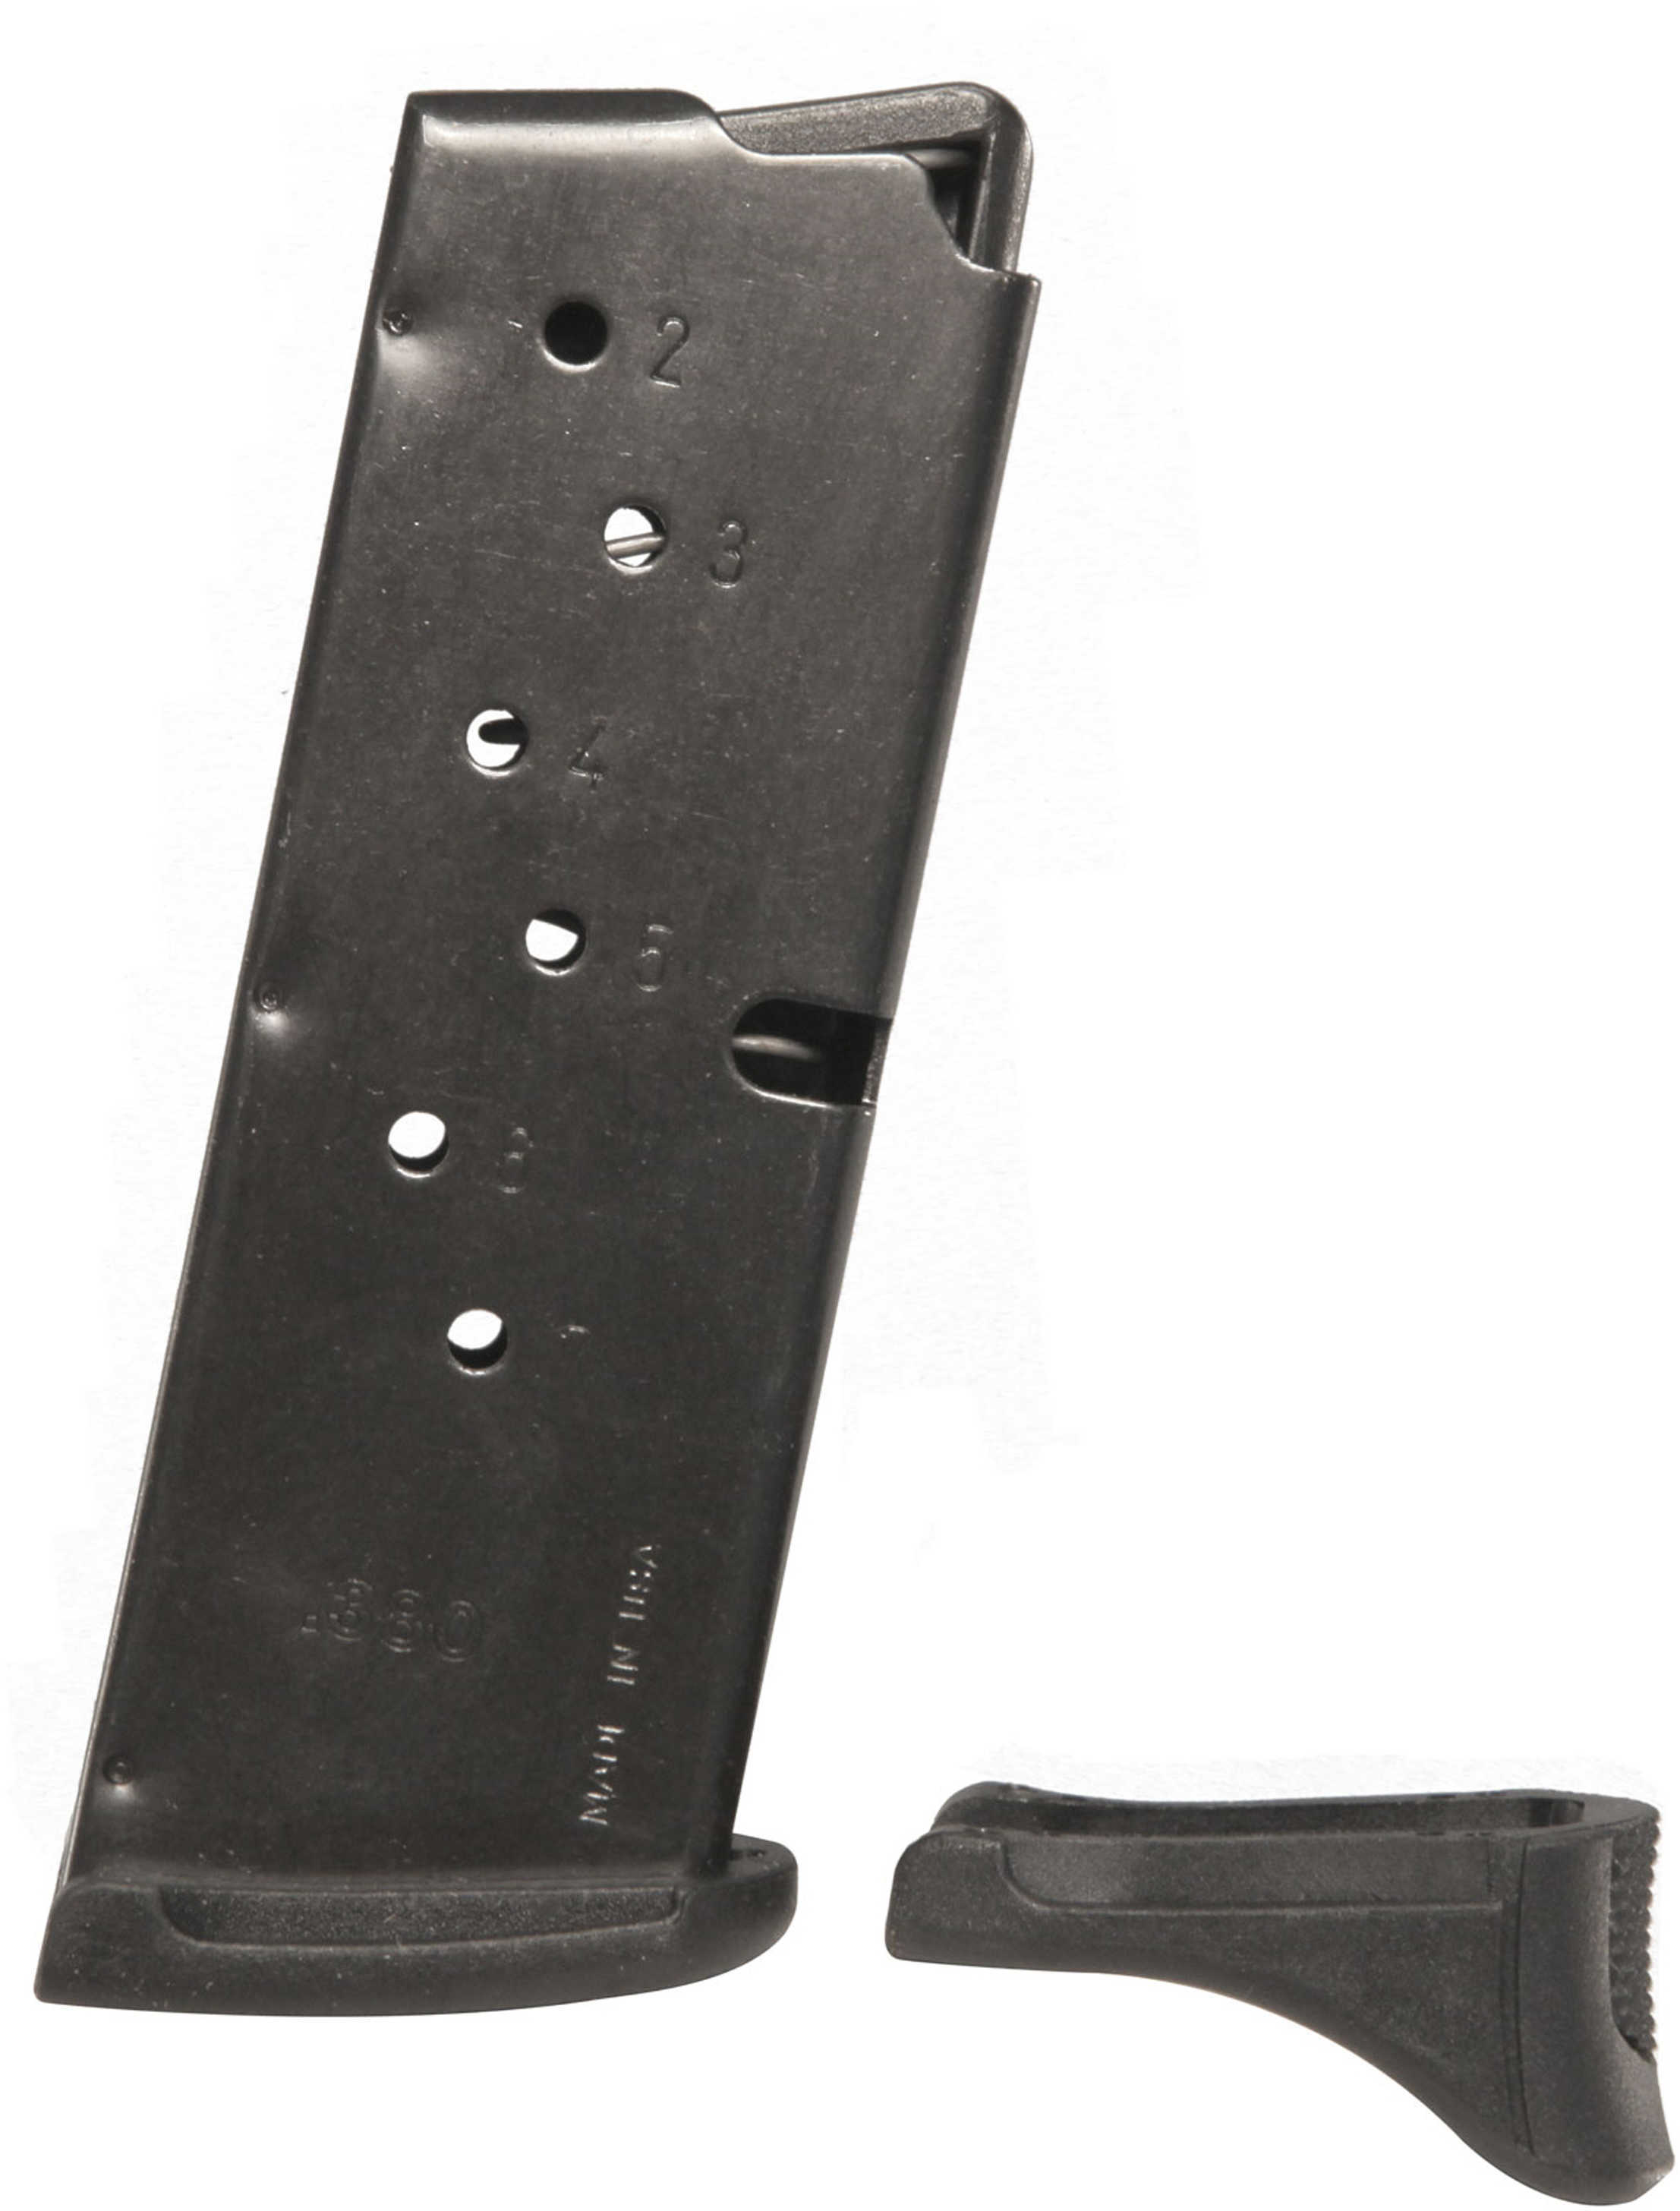 Ruger LC380 Magazine LC380EXTMAG7 .380 ACP 7 Round with Finger Extension Blued 90416